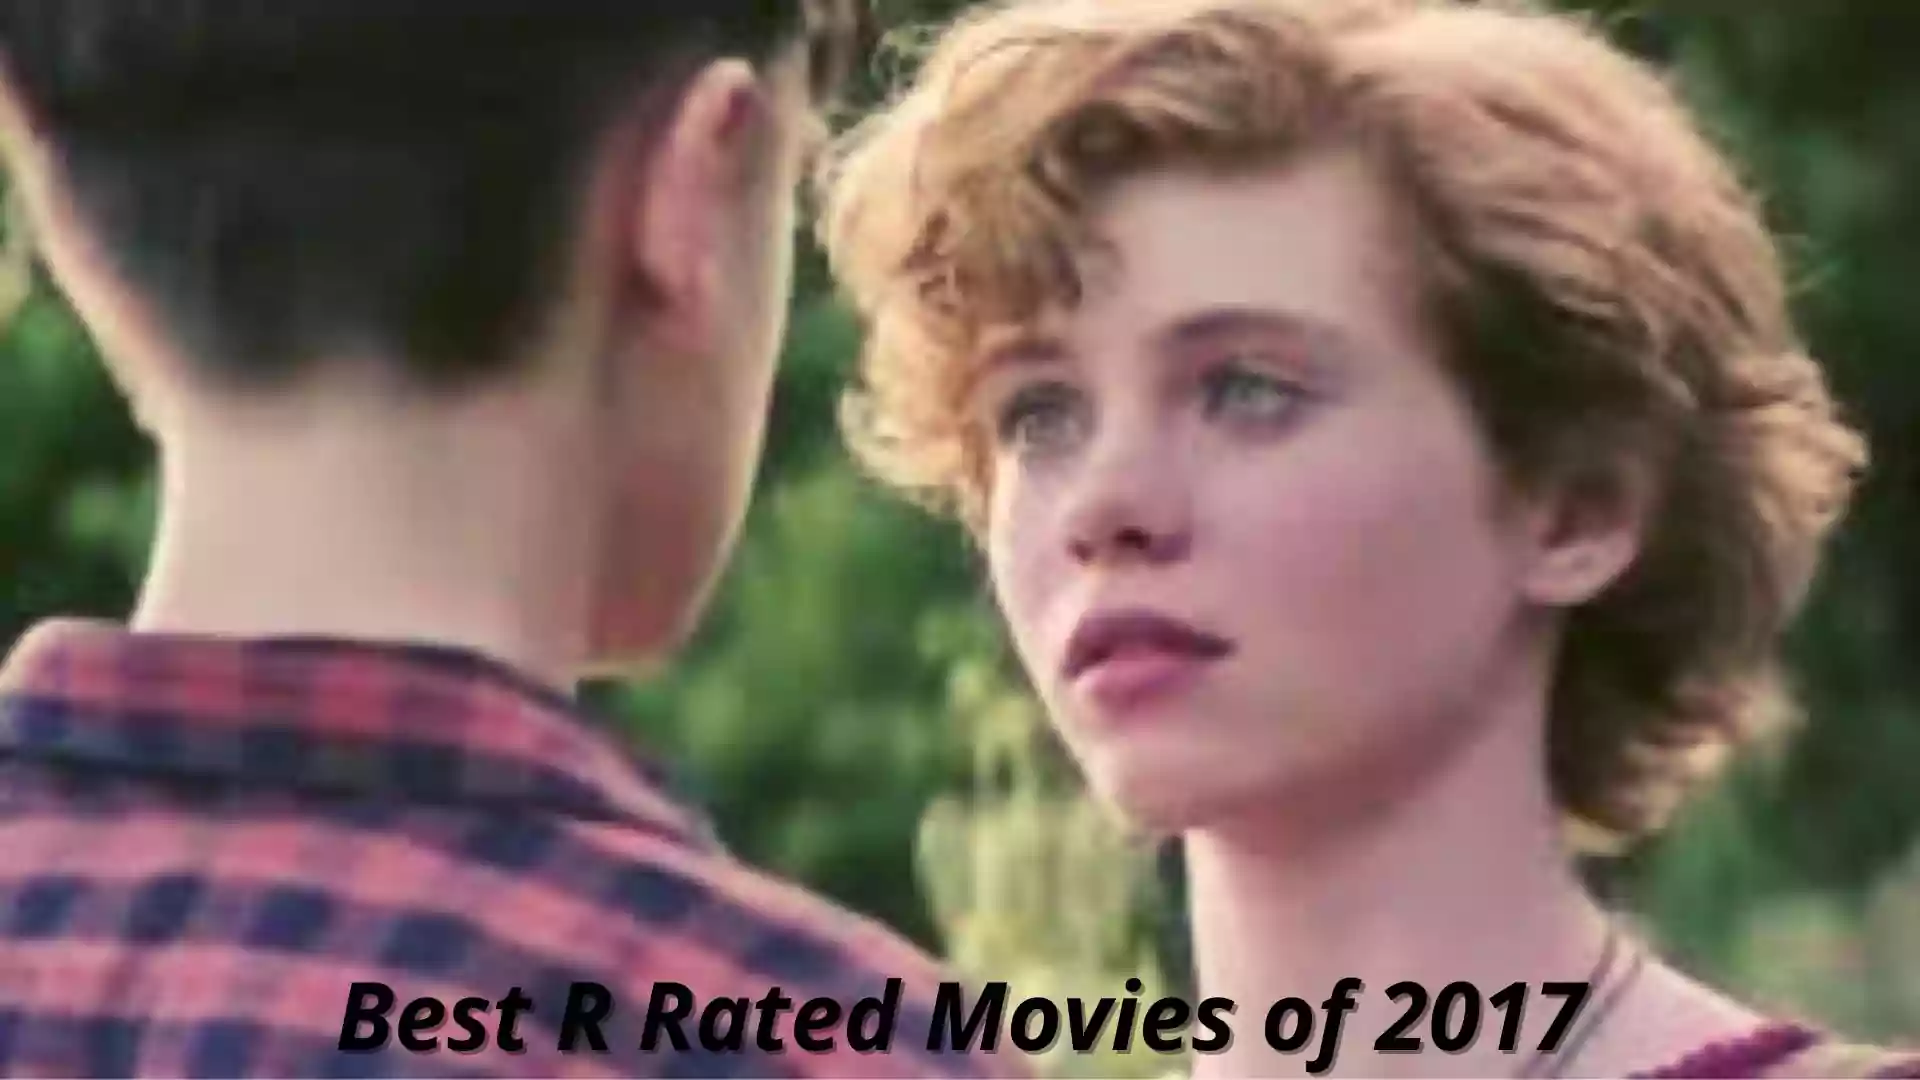 Best R Rated Movies of 2017